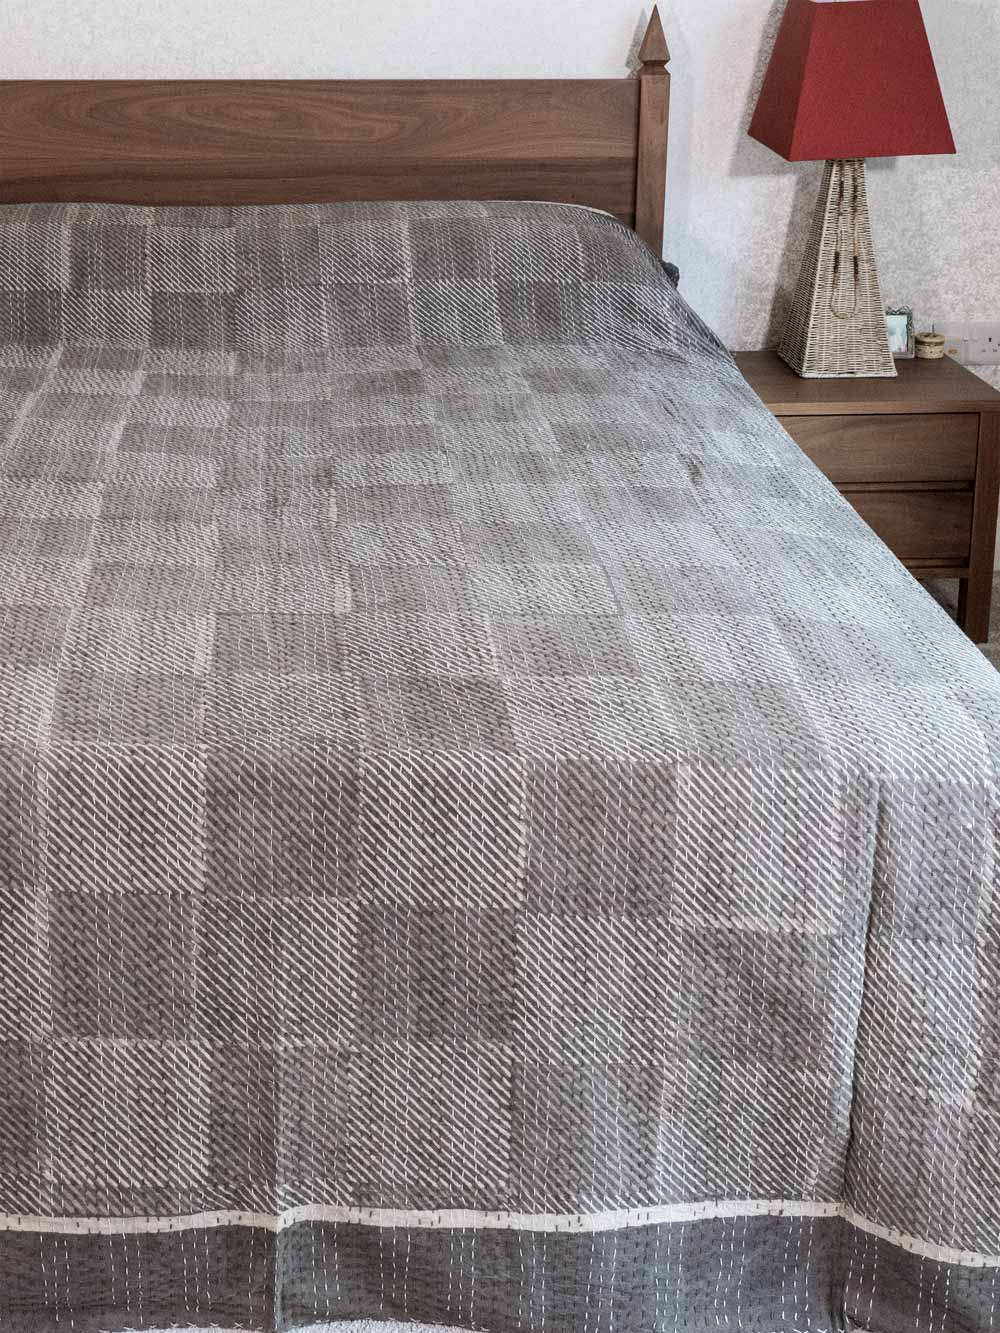 Gray Squares Printed Indian Bedspread